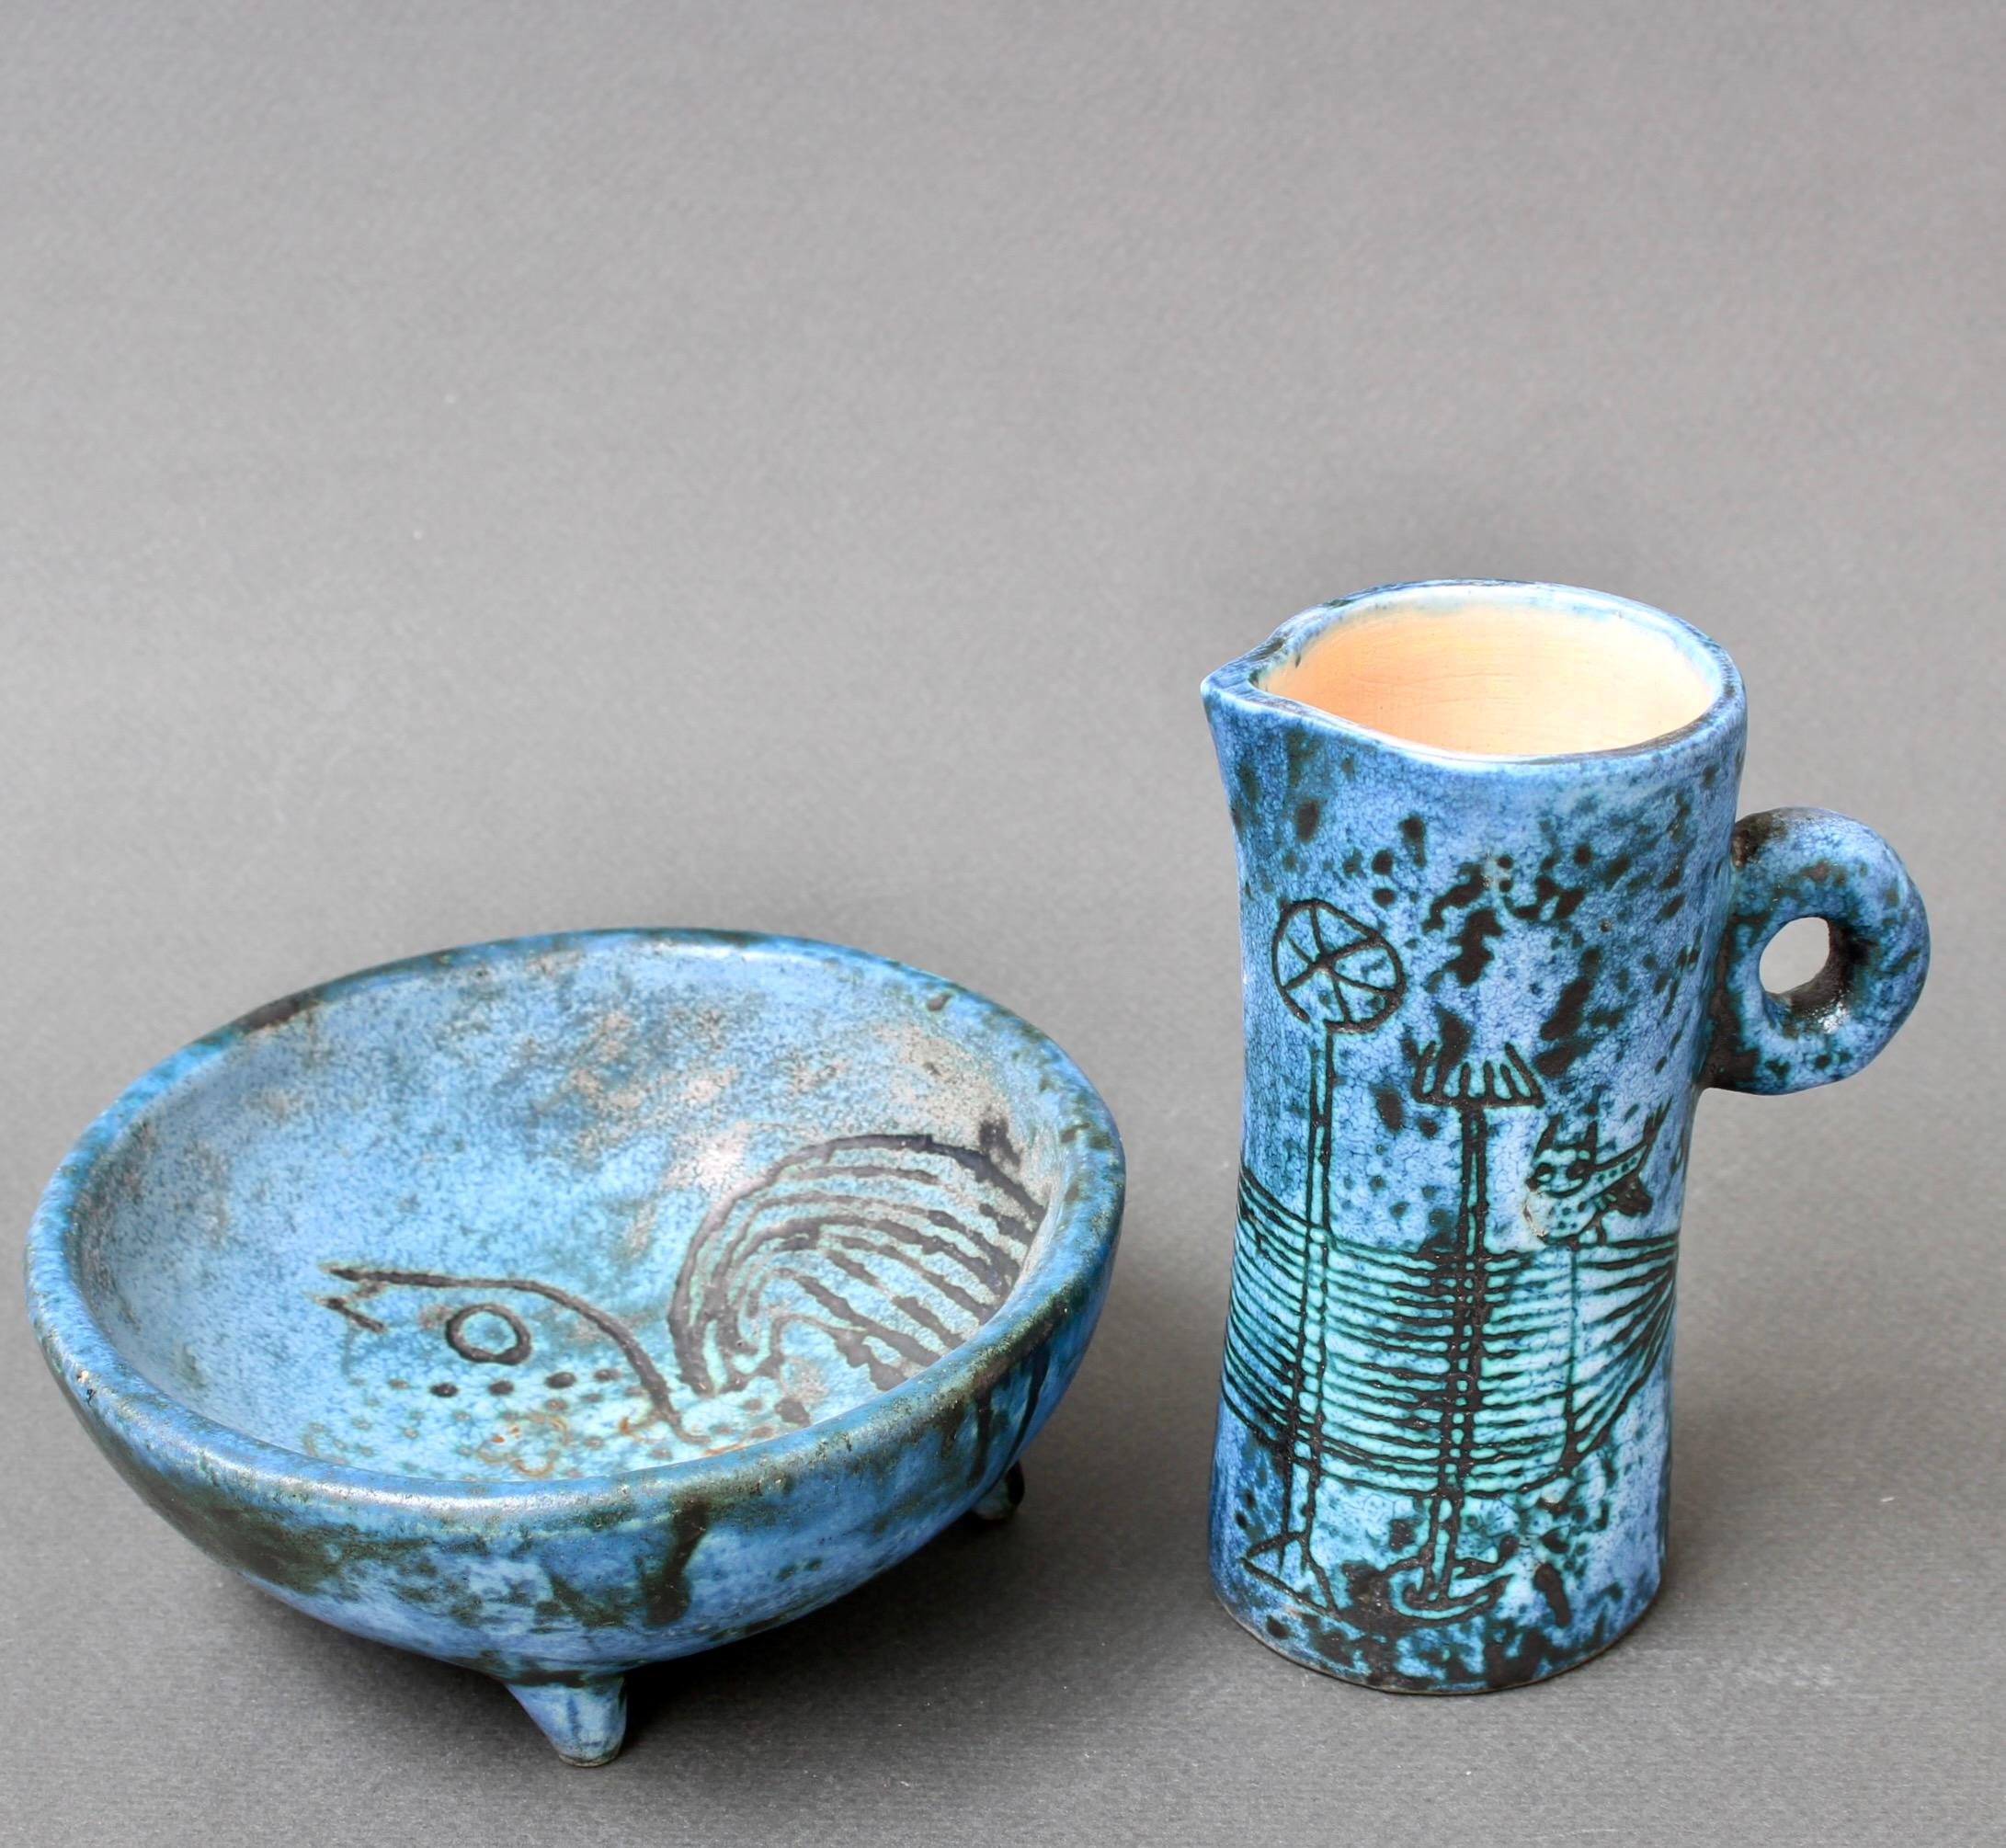 This diminutive pair of French vintage ceramic pieces have Blin's trademark cloudy blue glaze featuring primeval images of birds, animals and plants - seemingly from an undiscovered cave - etched in and around the small vessels. They are both in